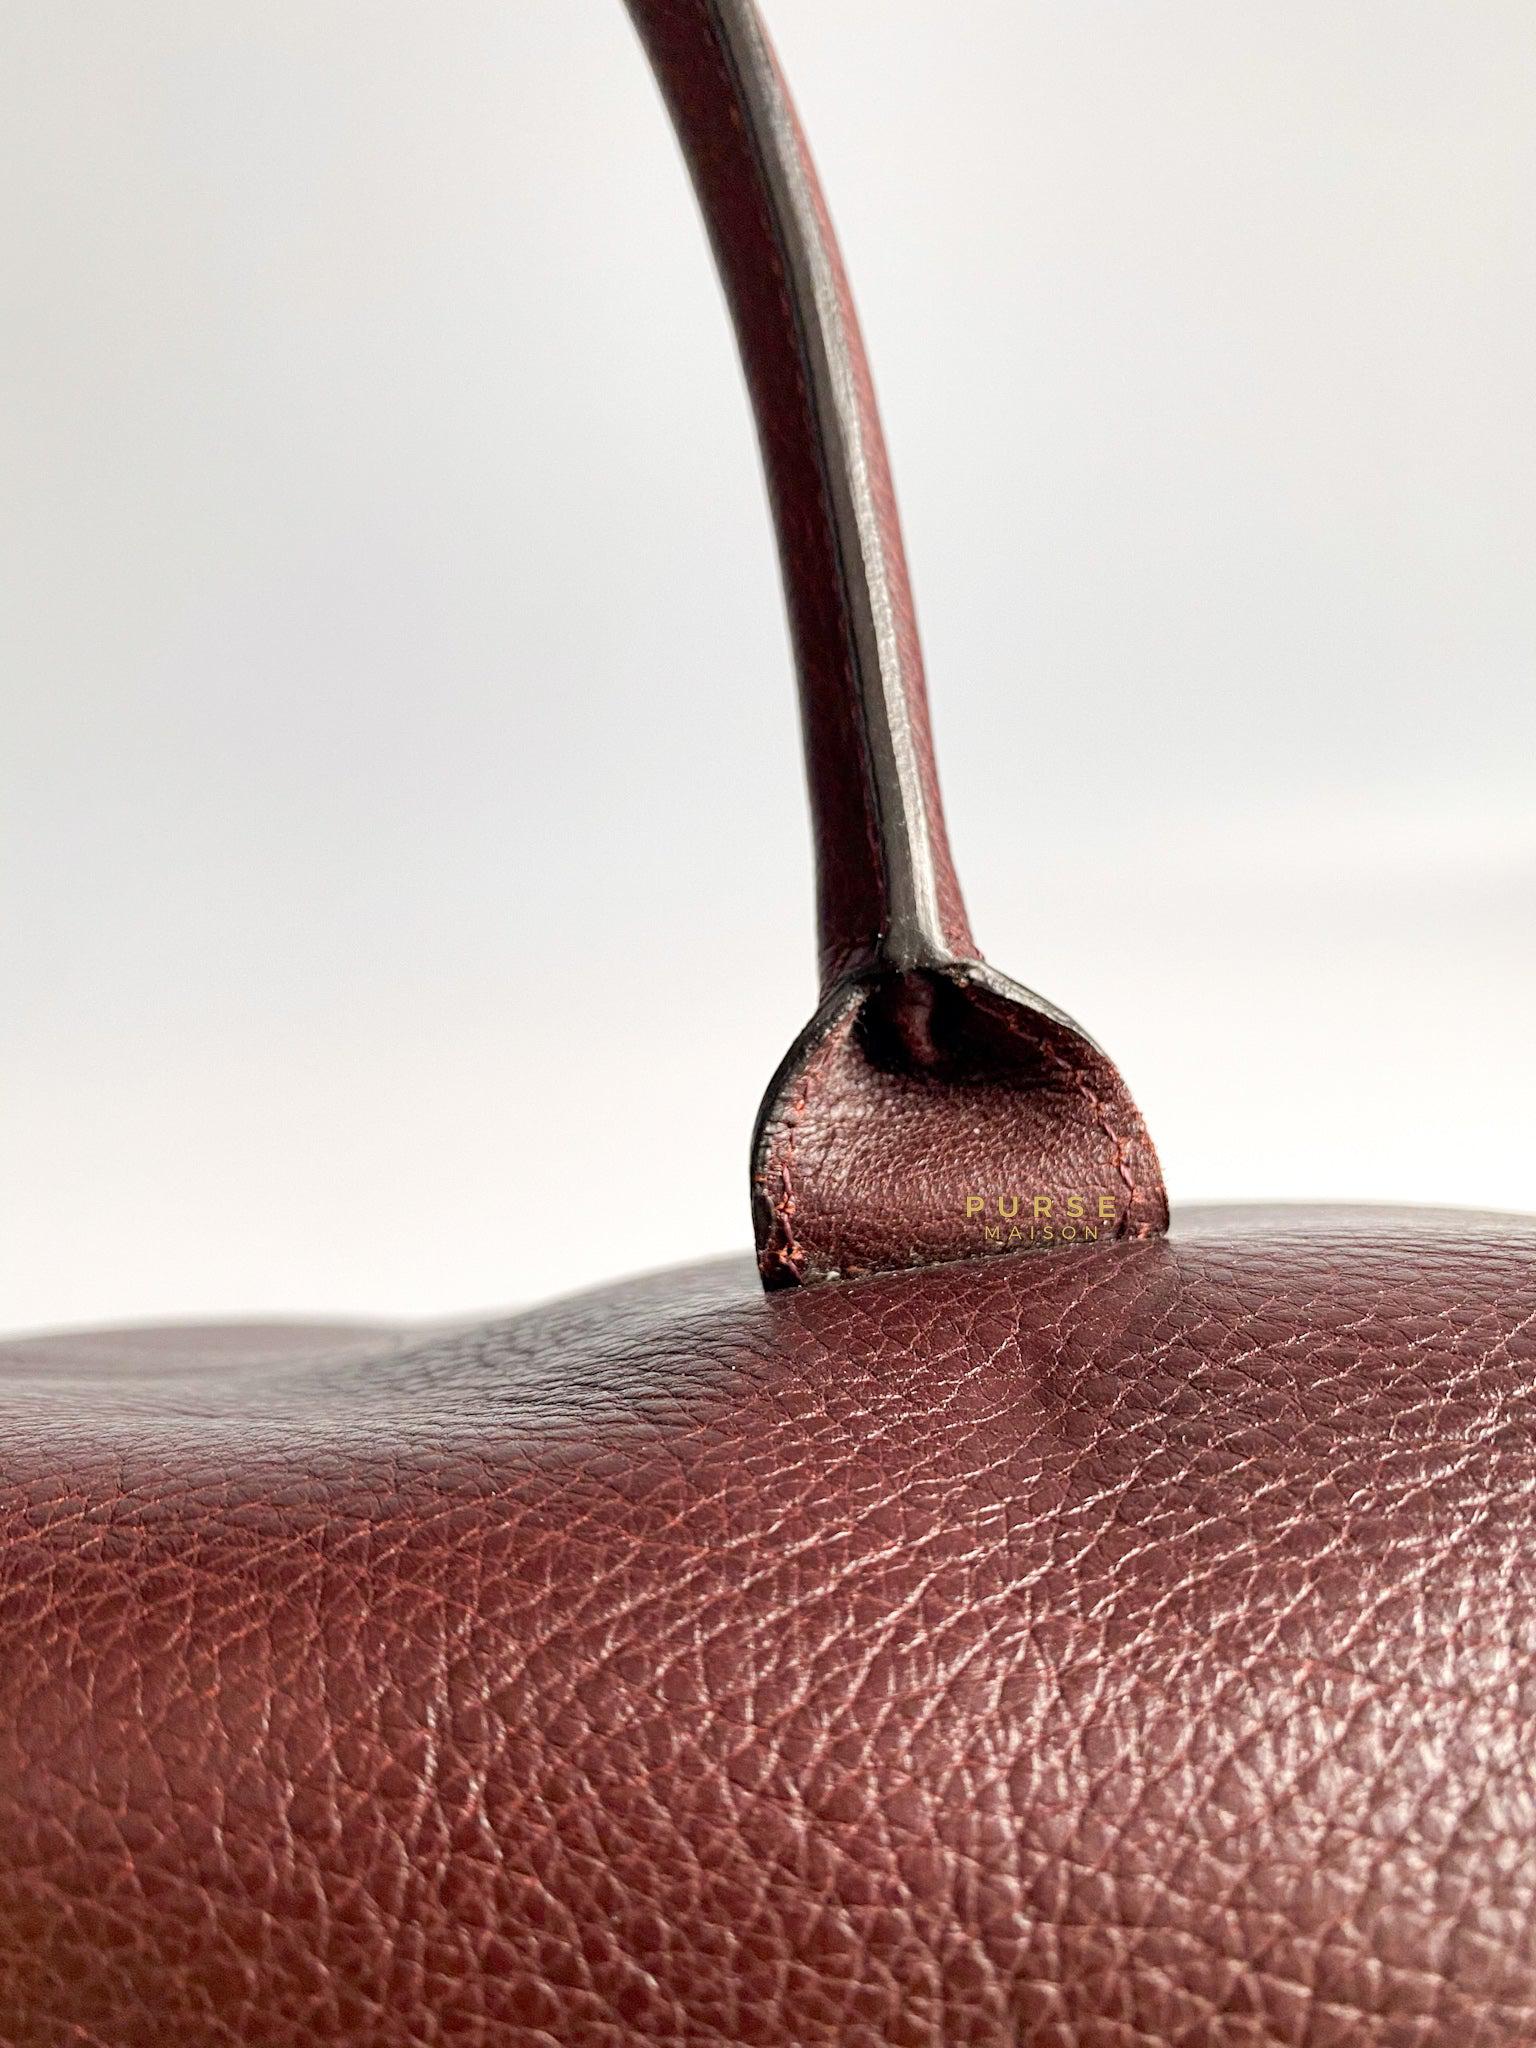 Mulberry Bayswater Oxblood Grained Leather Tote Bag